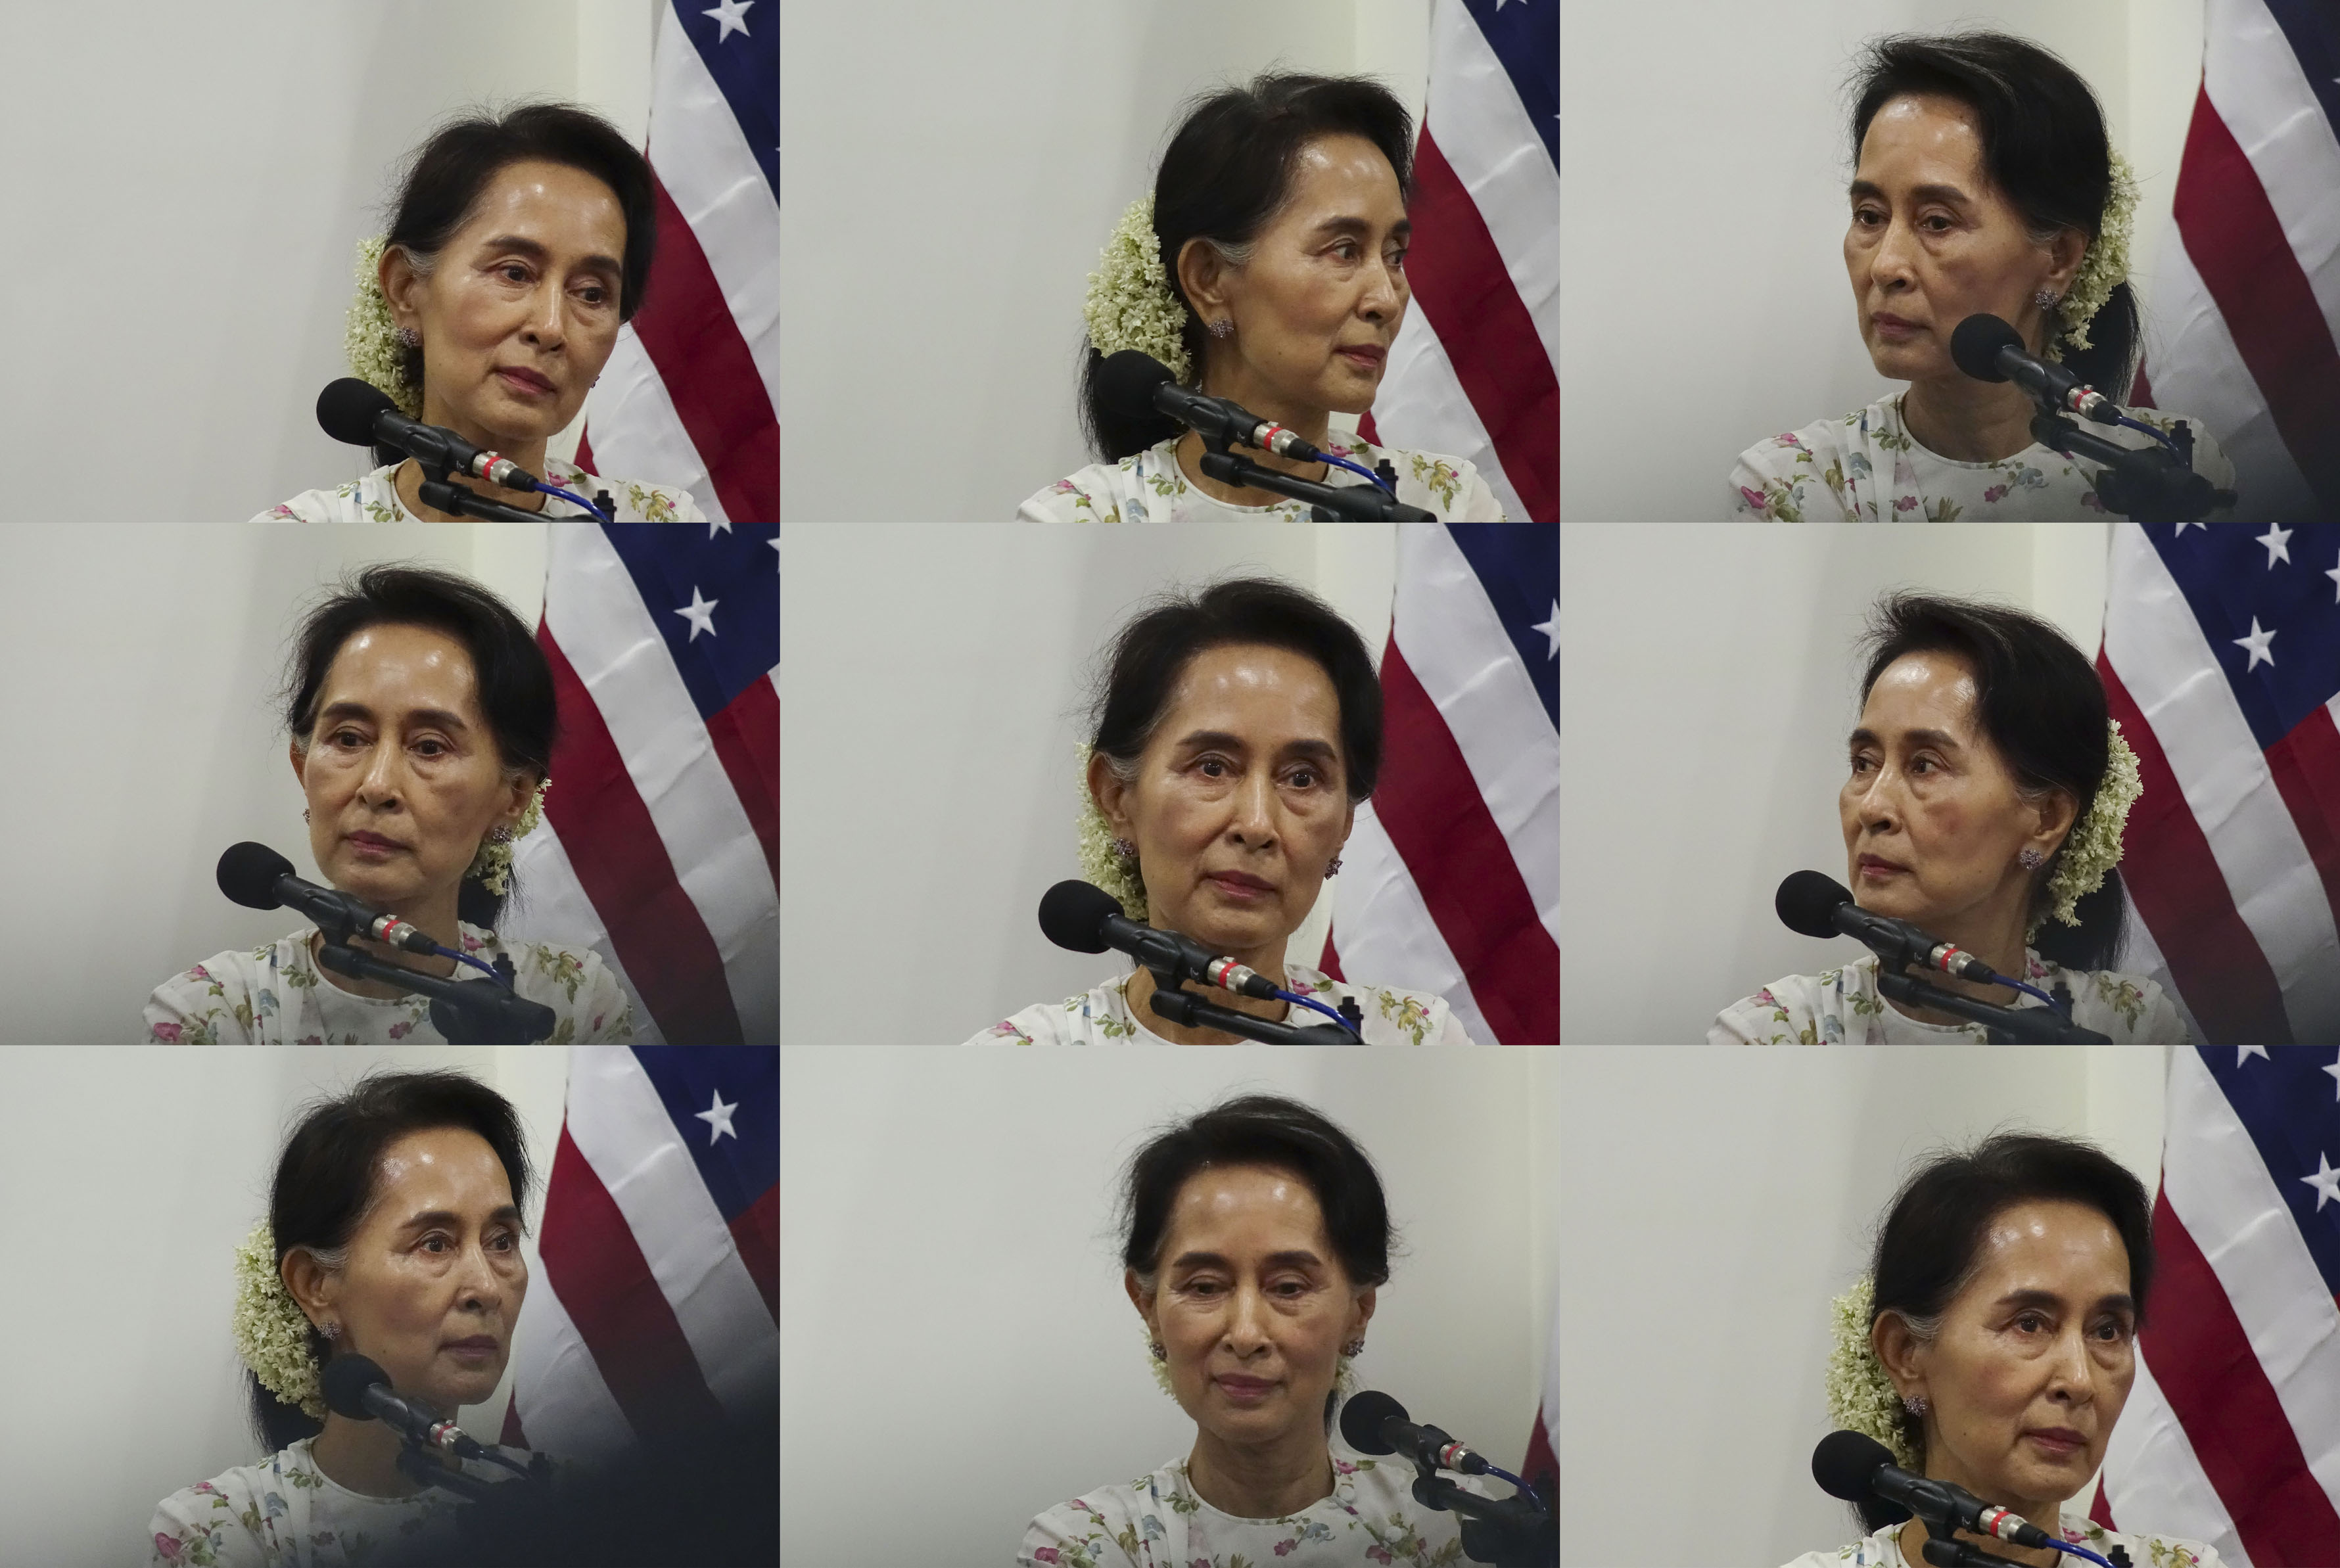 Naypyidaw, Myanmar, June, 2016. Aung San Suu Kyi, Minister of Foreign Affairs and State Counselor  of Myanmar (Burma) holds a press conference with U.S. Secretary of State John Kerry.